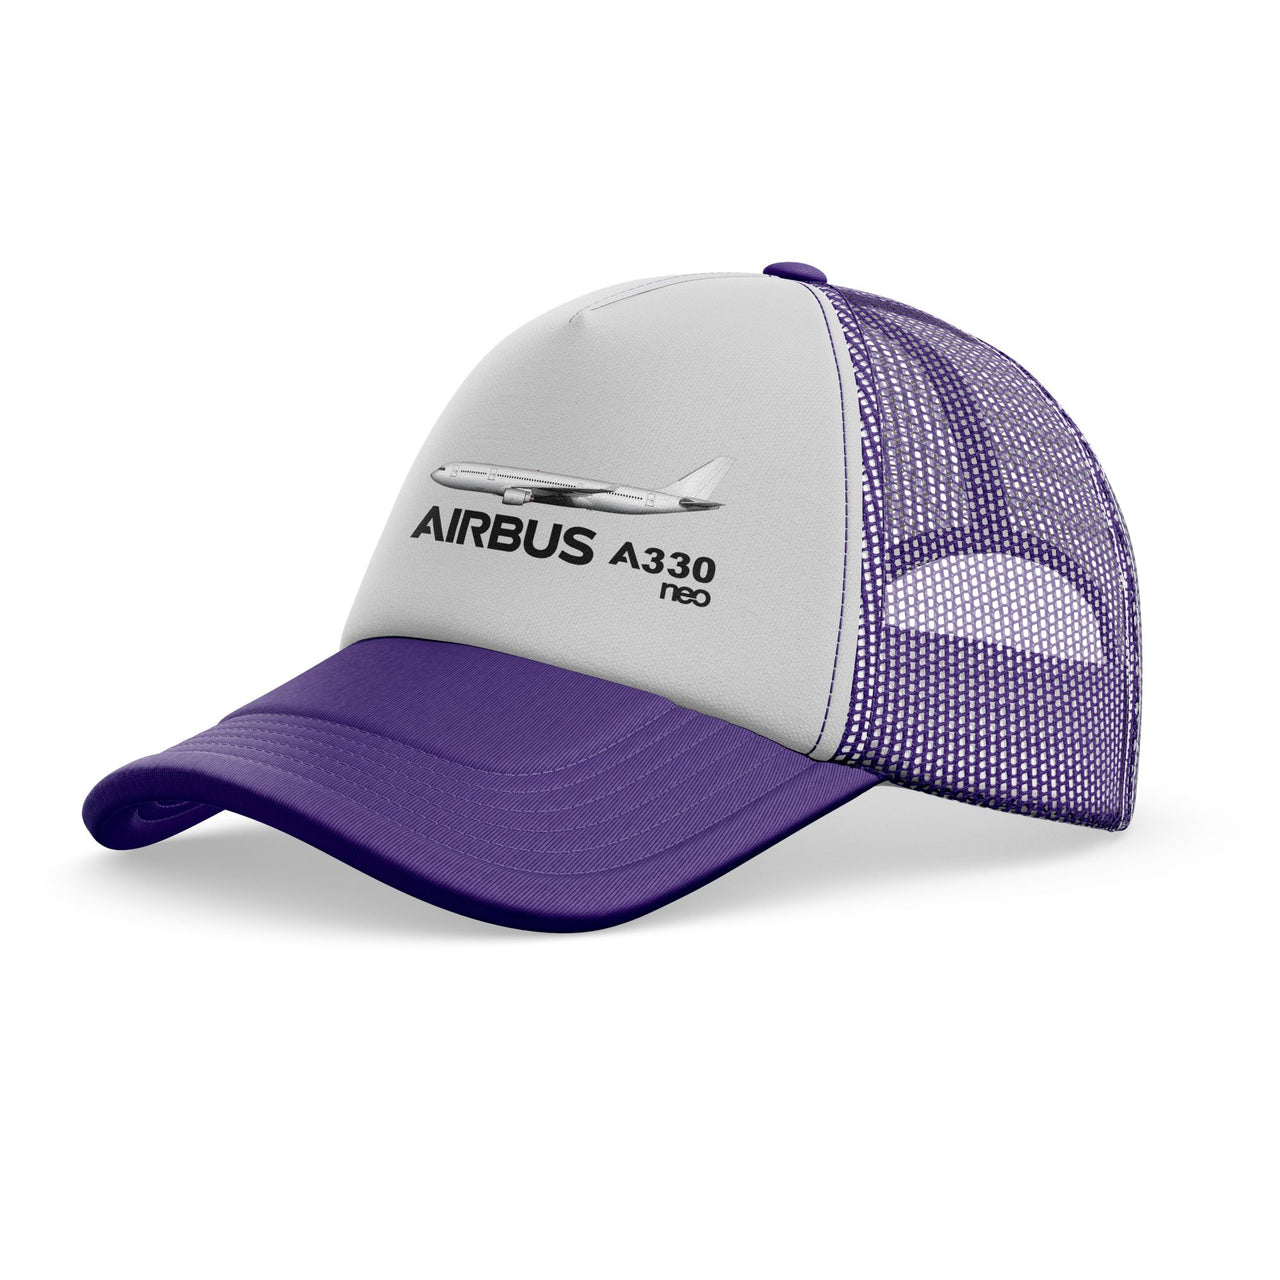 The Airbus A330neo Designed Trucker Caps & Hats